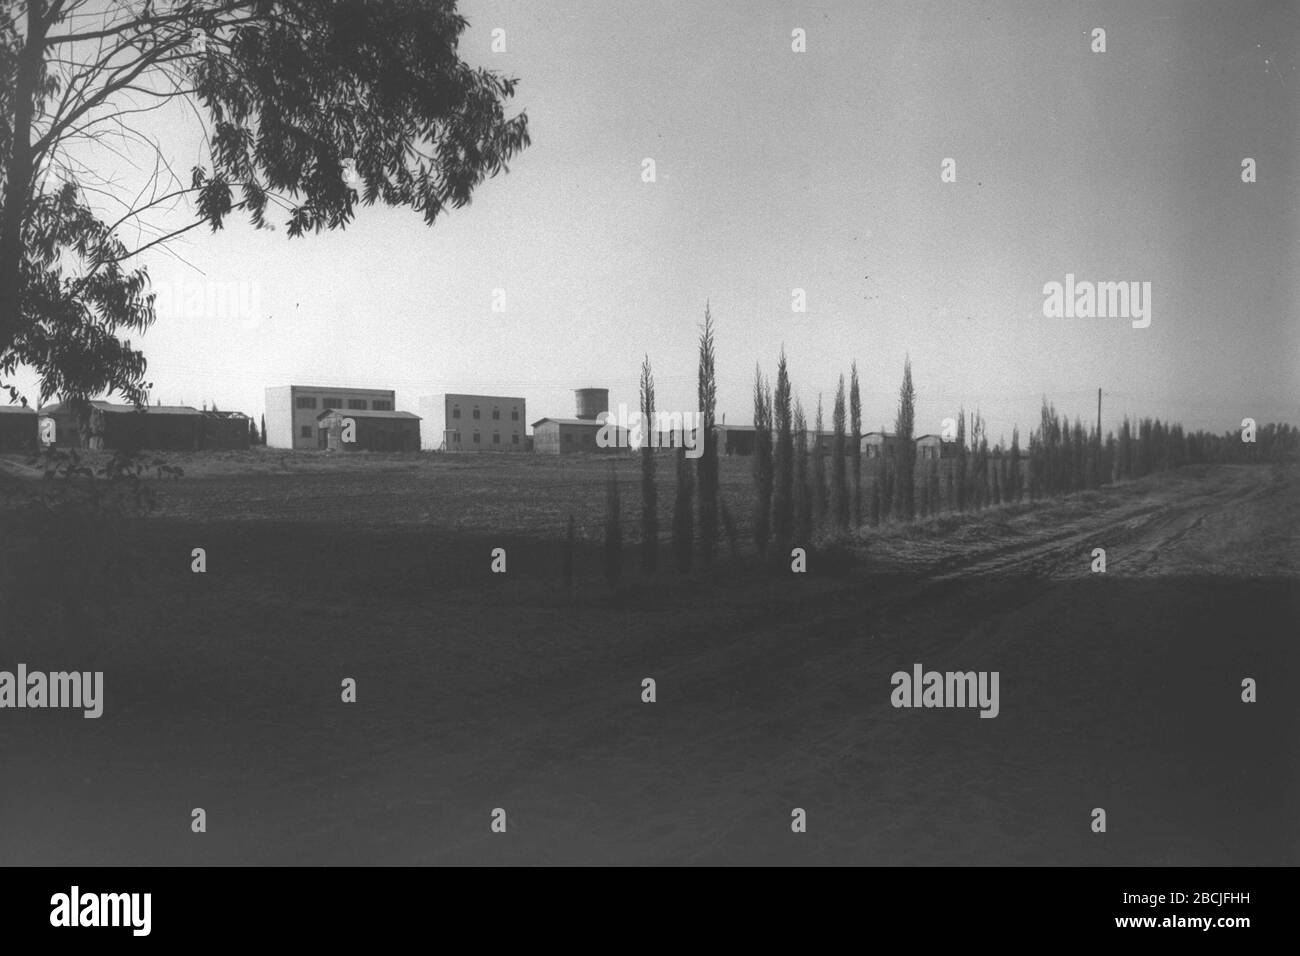 English Kibbutz Maabarot At Night Ss O E I U E I E U O U I 30 September 1936 This Is Available From National Photo Collection Of Israel Photography Dept Goverment Press Office Link Under The Digital Id D17 068 This